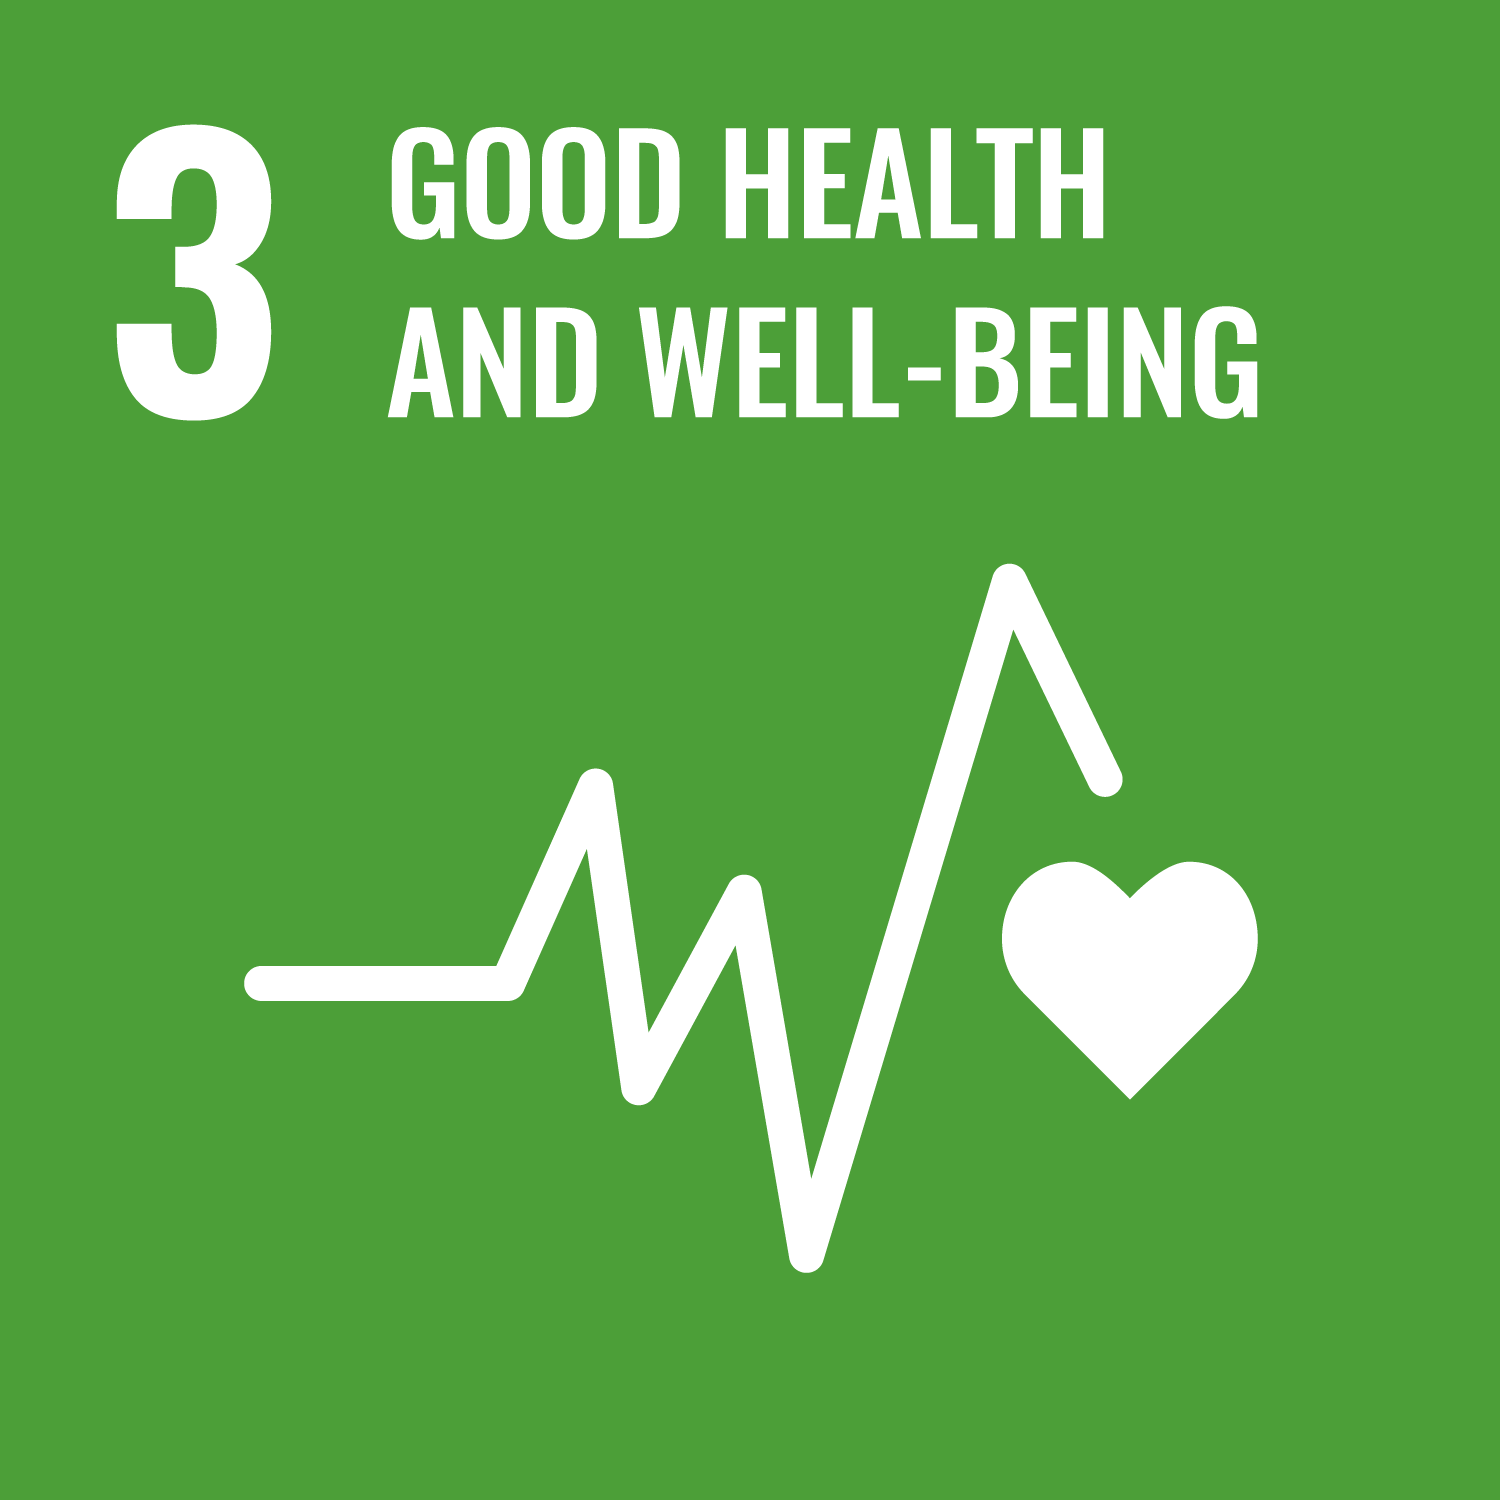 UN Sustainable goal - Good Health and Wellbeing